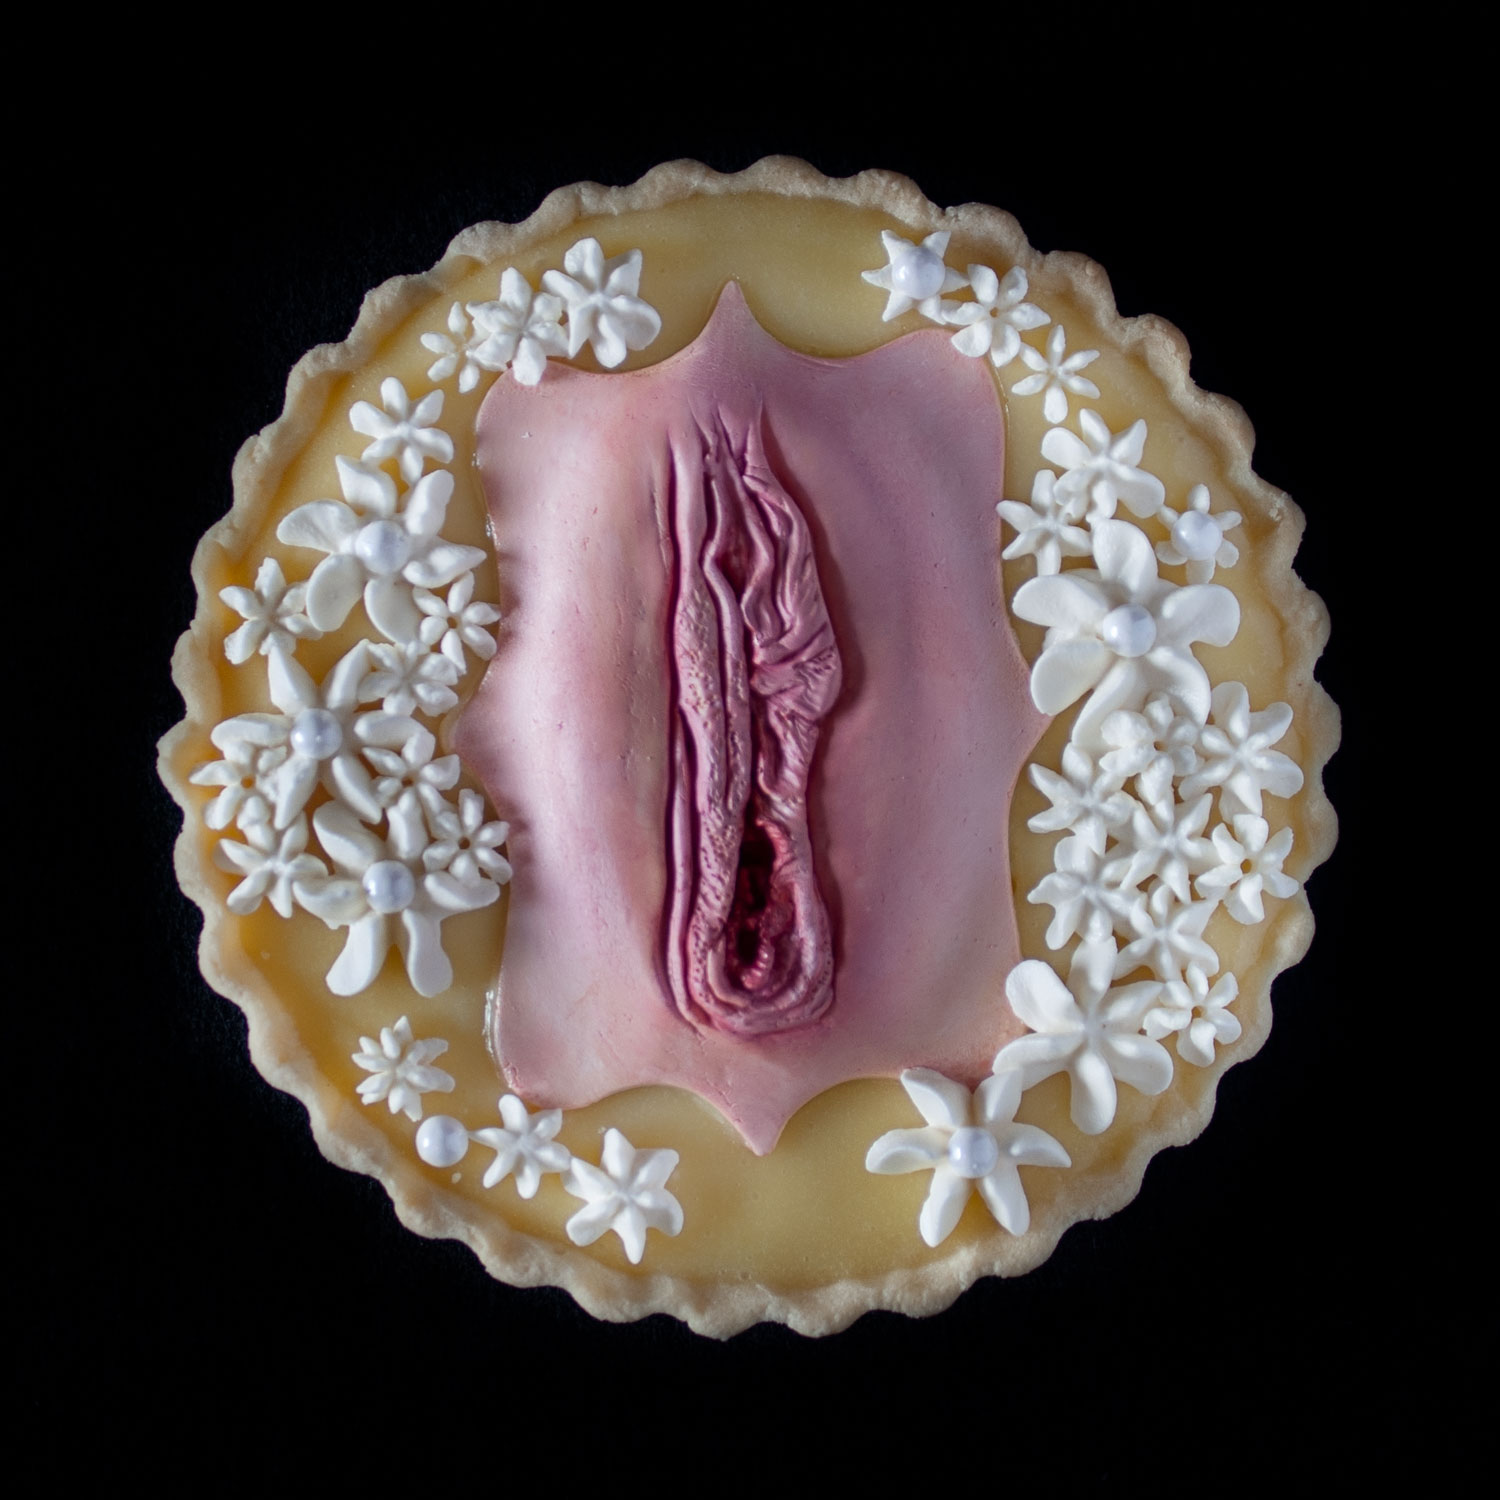 A lemon cream tart with a hand sculpted vulva decorating the top. The vulva is painted to look like real flesh.